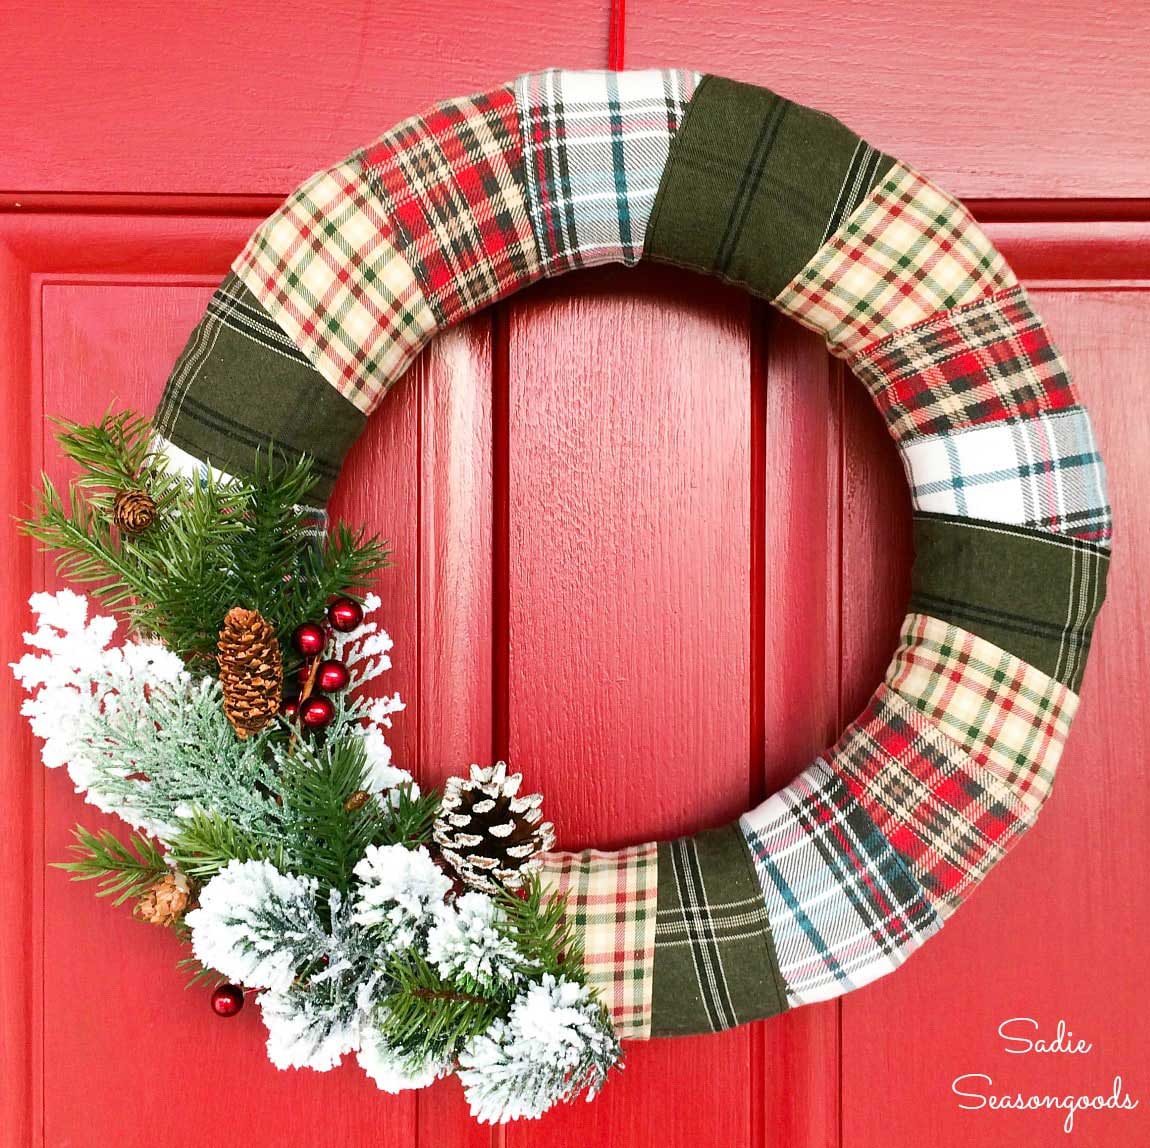 Plaid Christmas wreath made from recycled flannel shirts